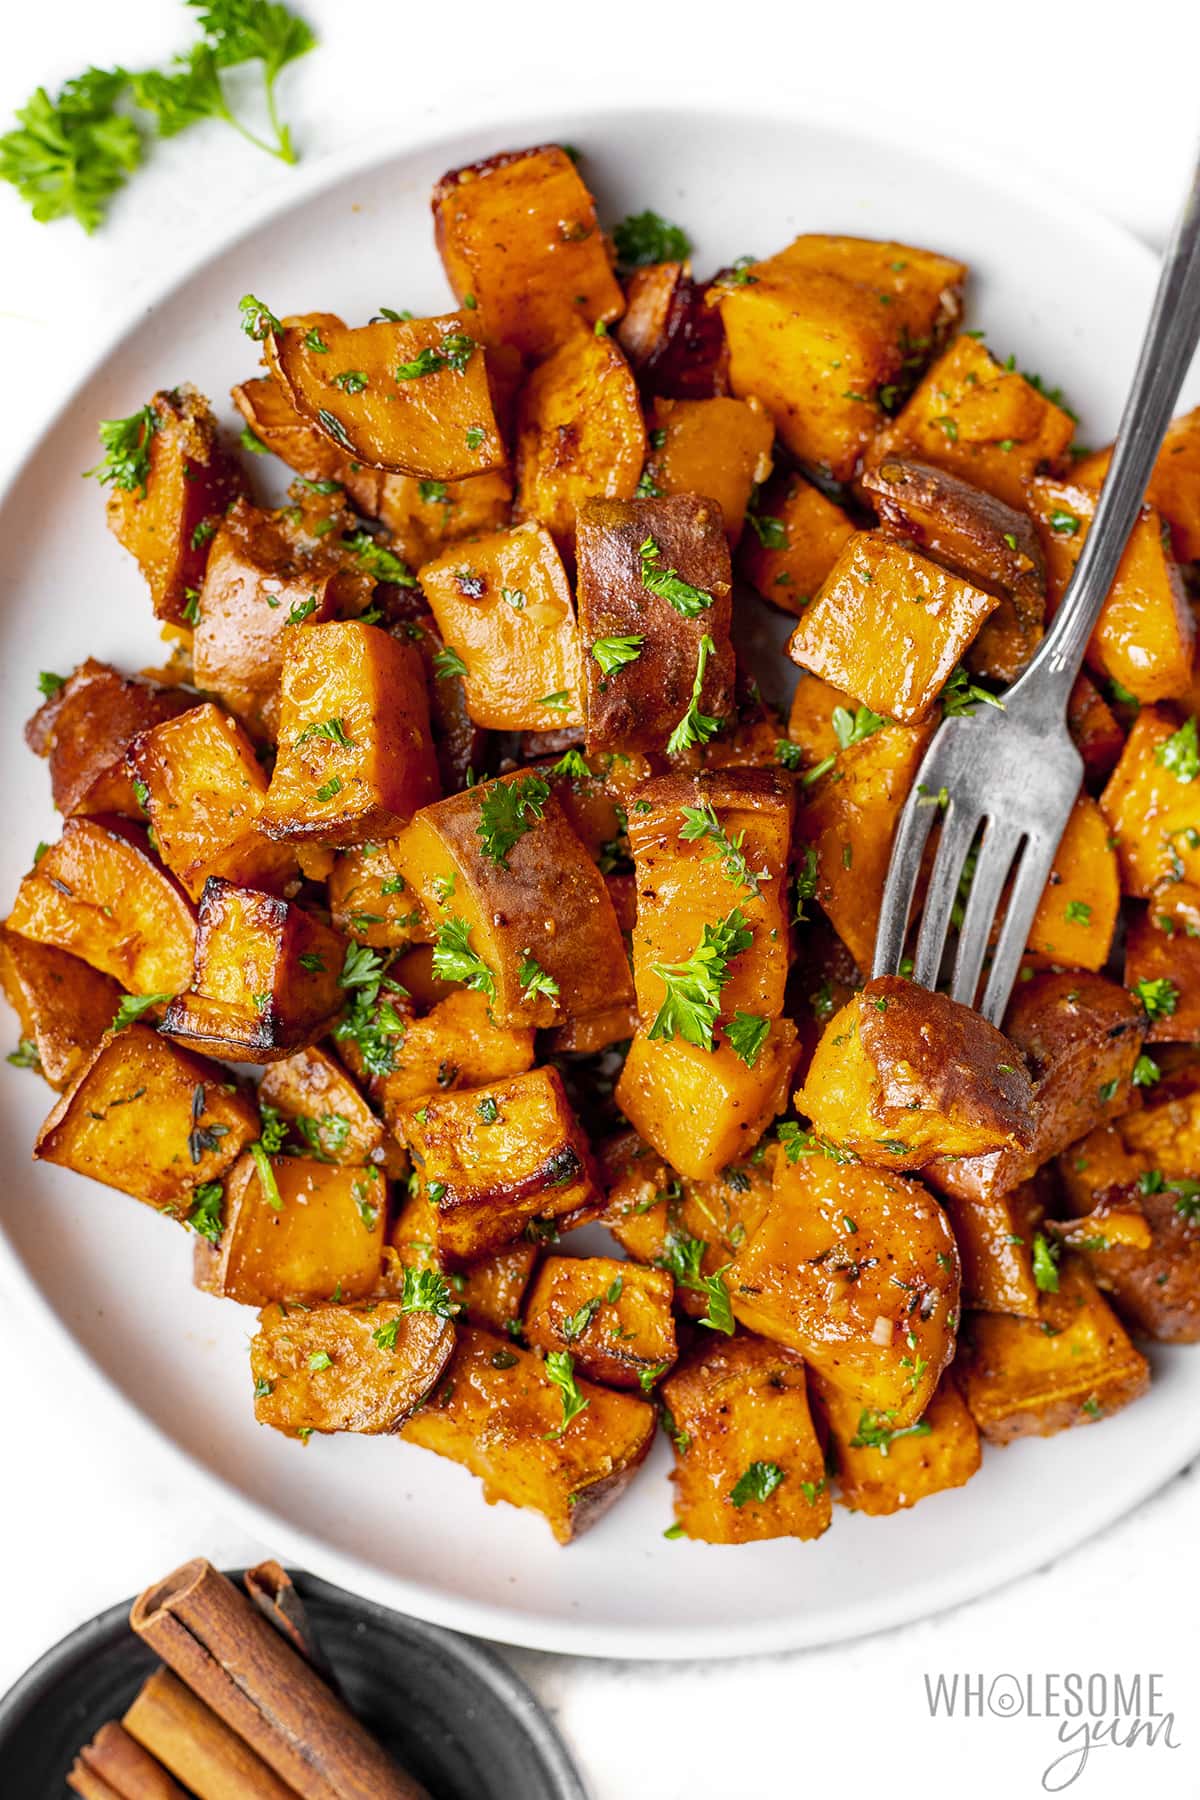 Full plate of roasted sweet potato cubes.